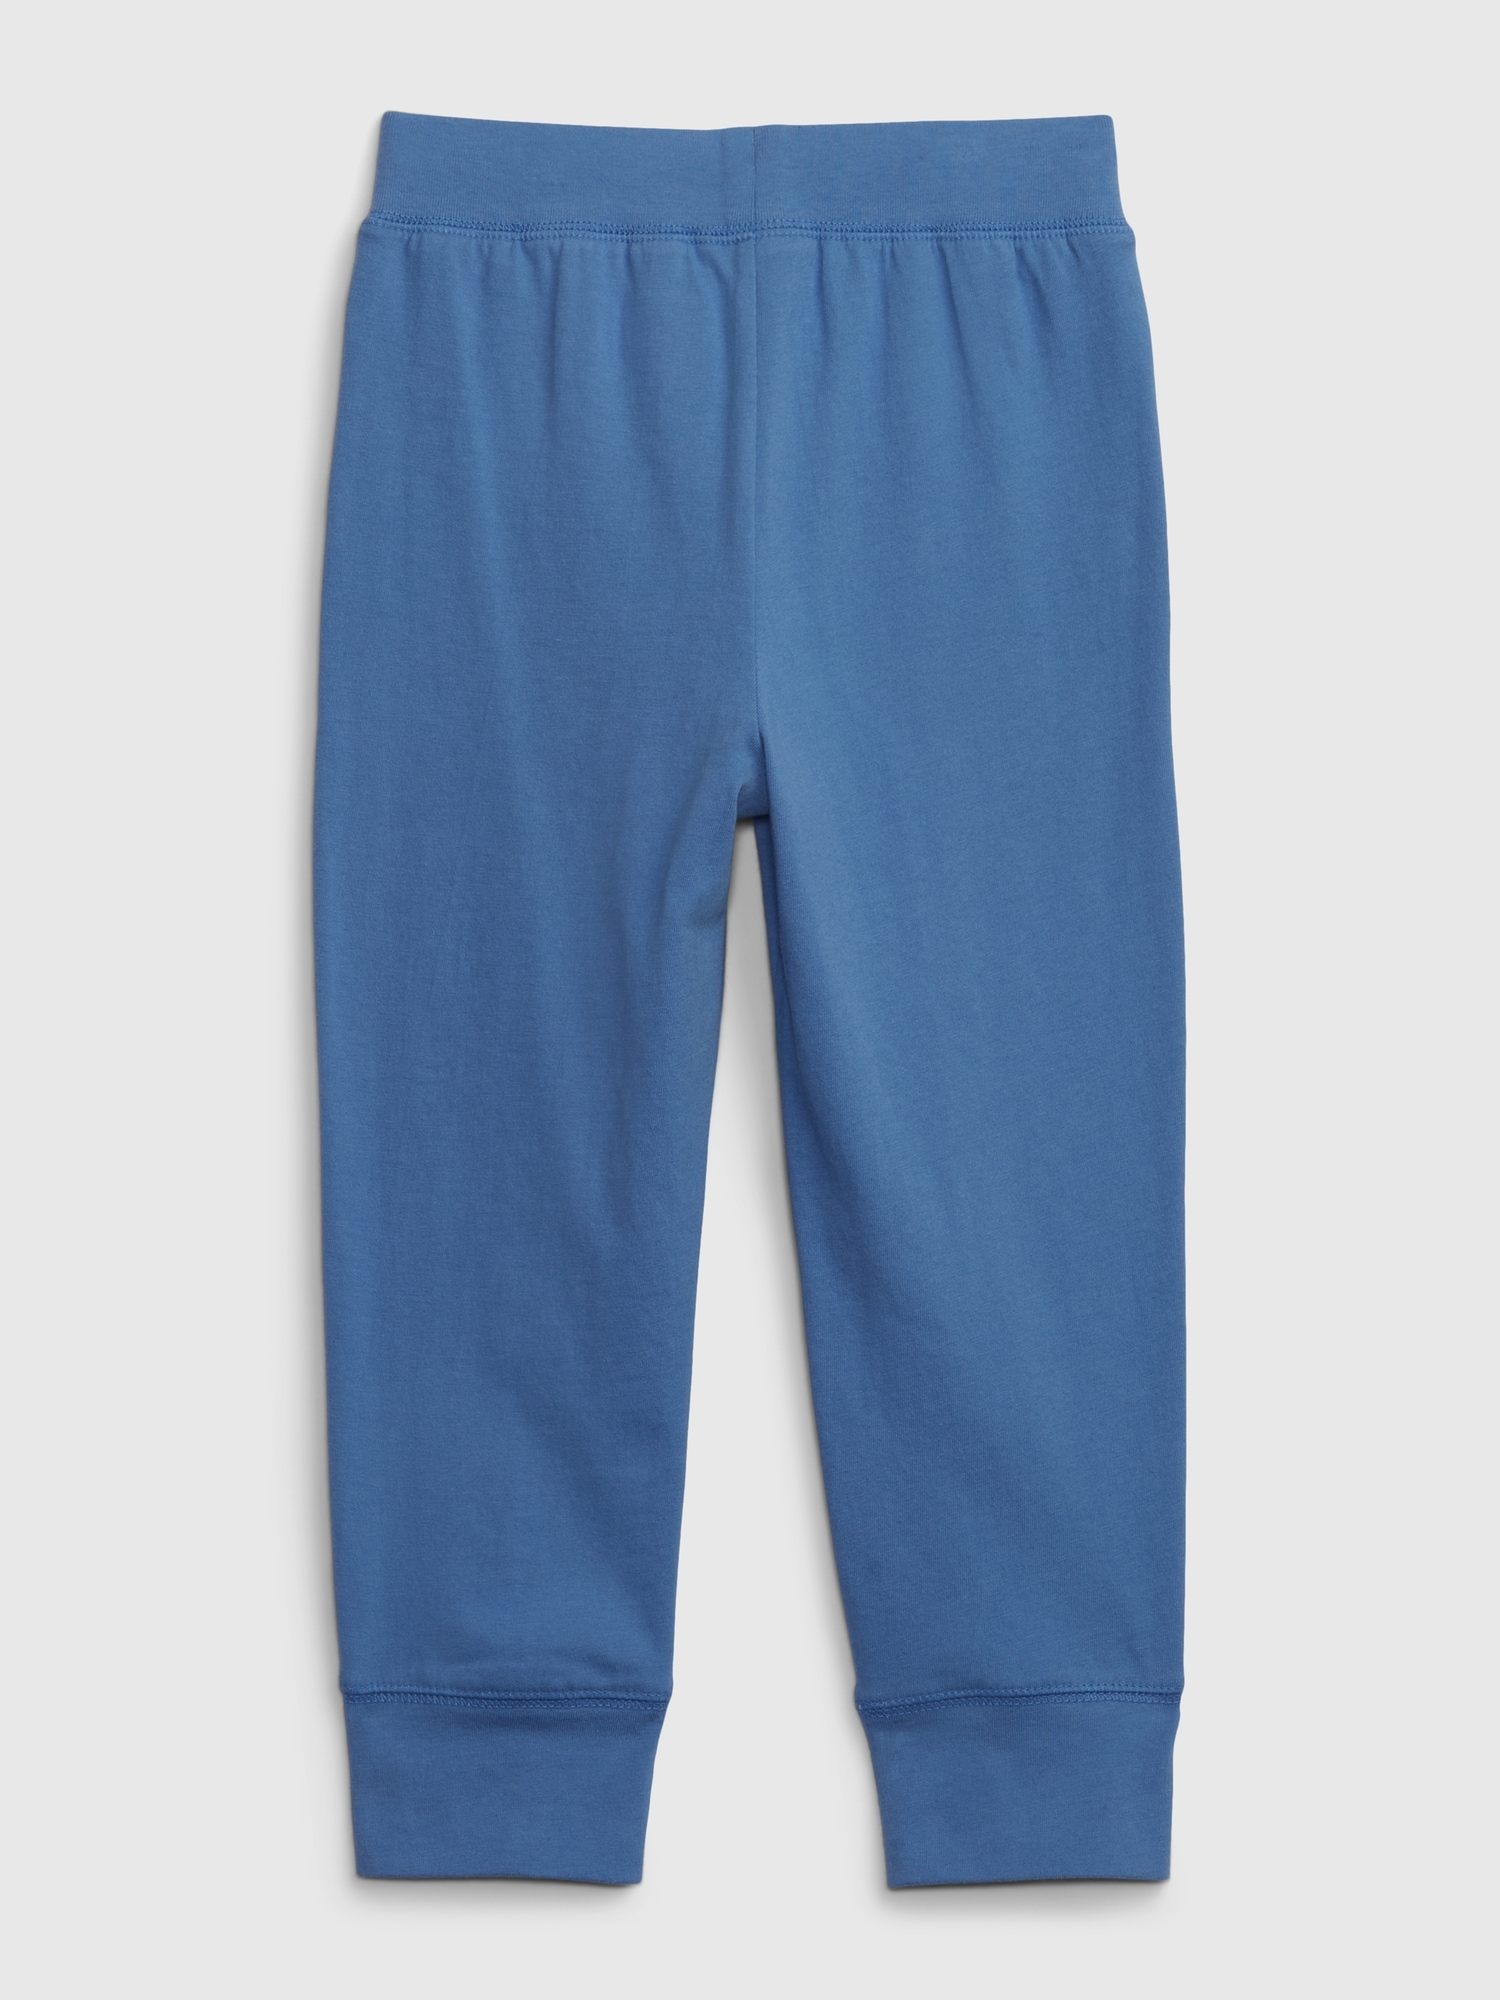 Toddler Organic Cotton Mix and Match Pull-On Pants | Gap